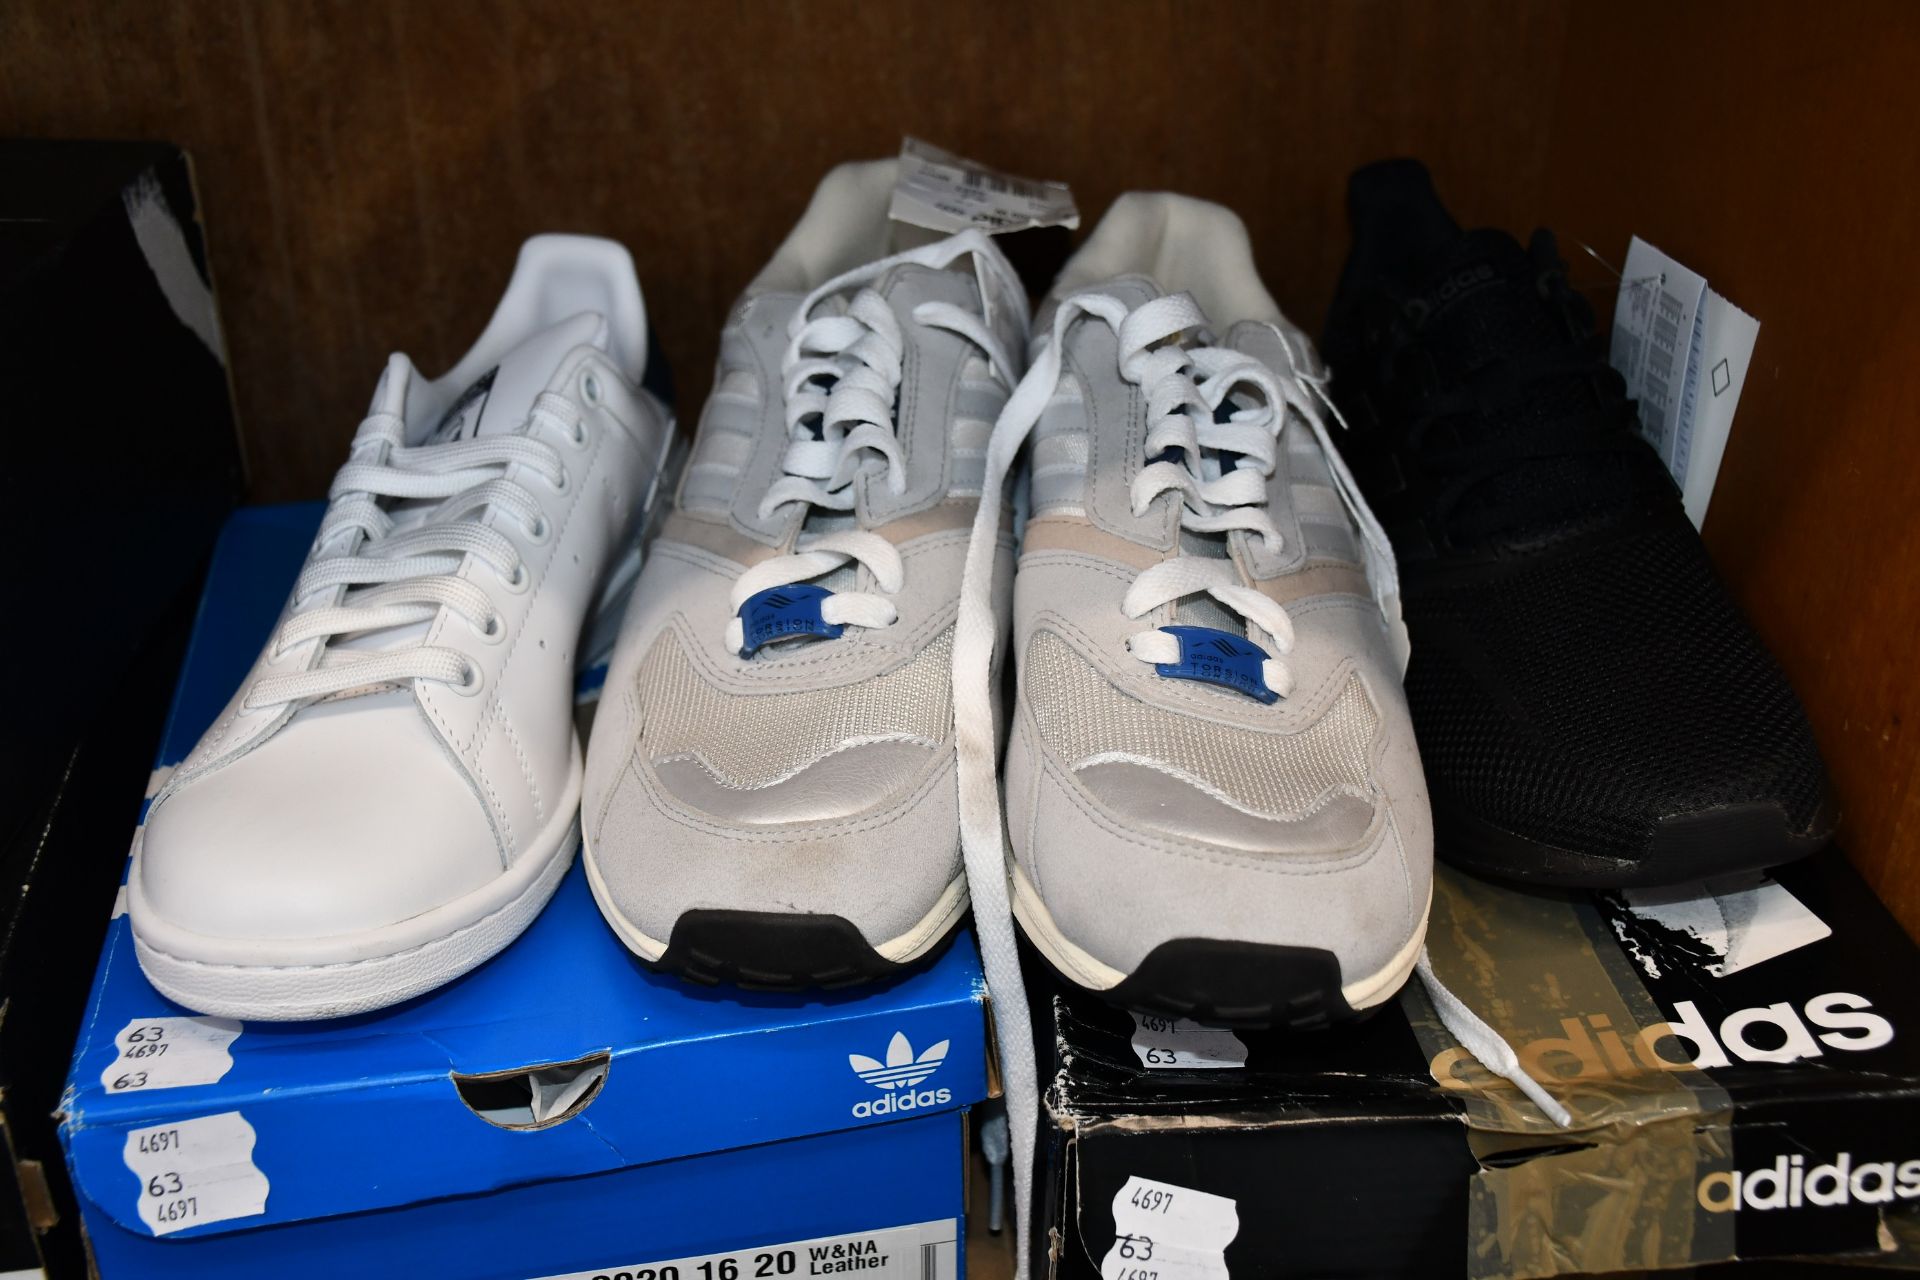 A pair of Adidas Stan Smith trainers (UK 6), a pair of Adidas Runfalcon trainers (UK 5.5) and a pair